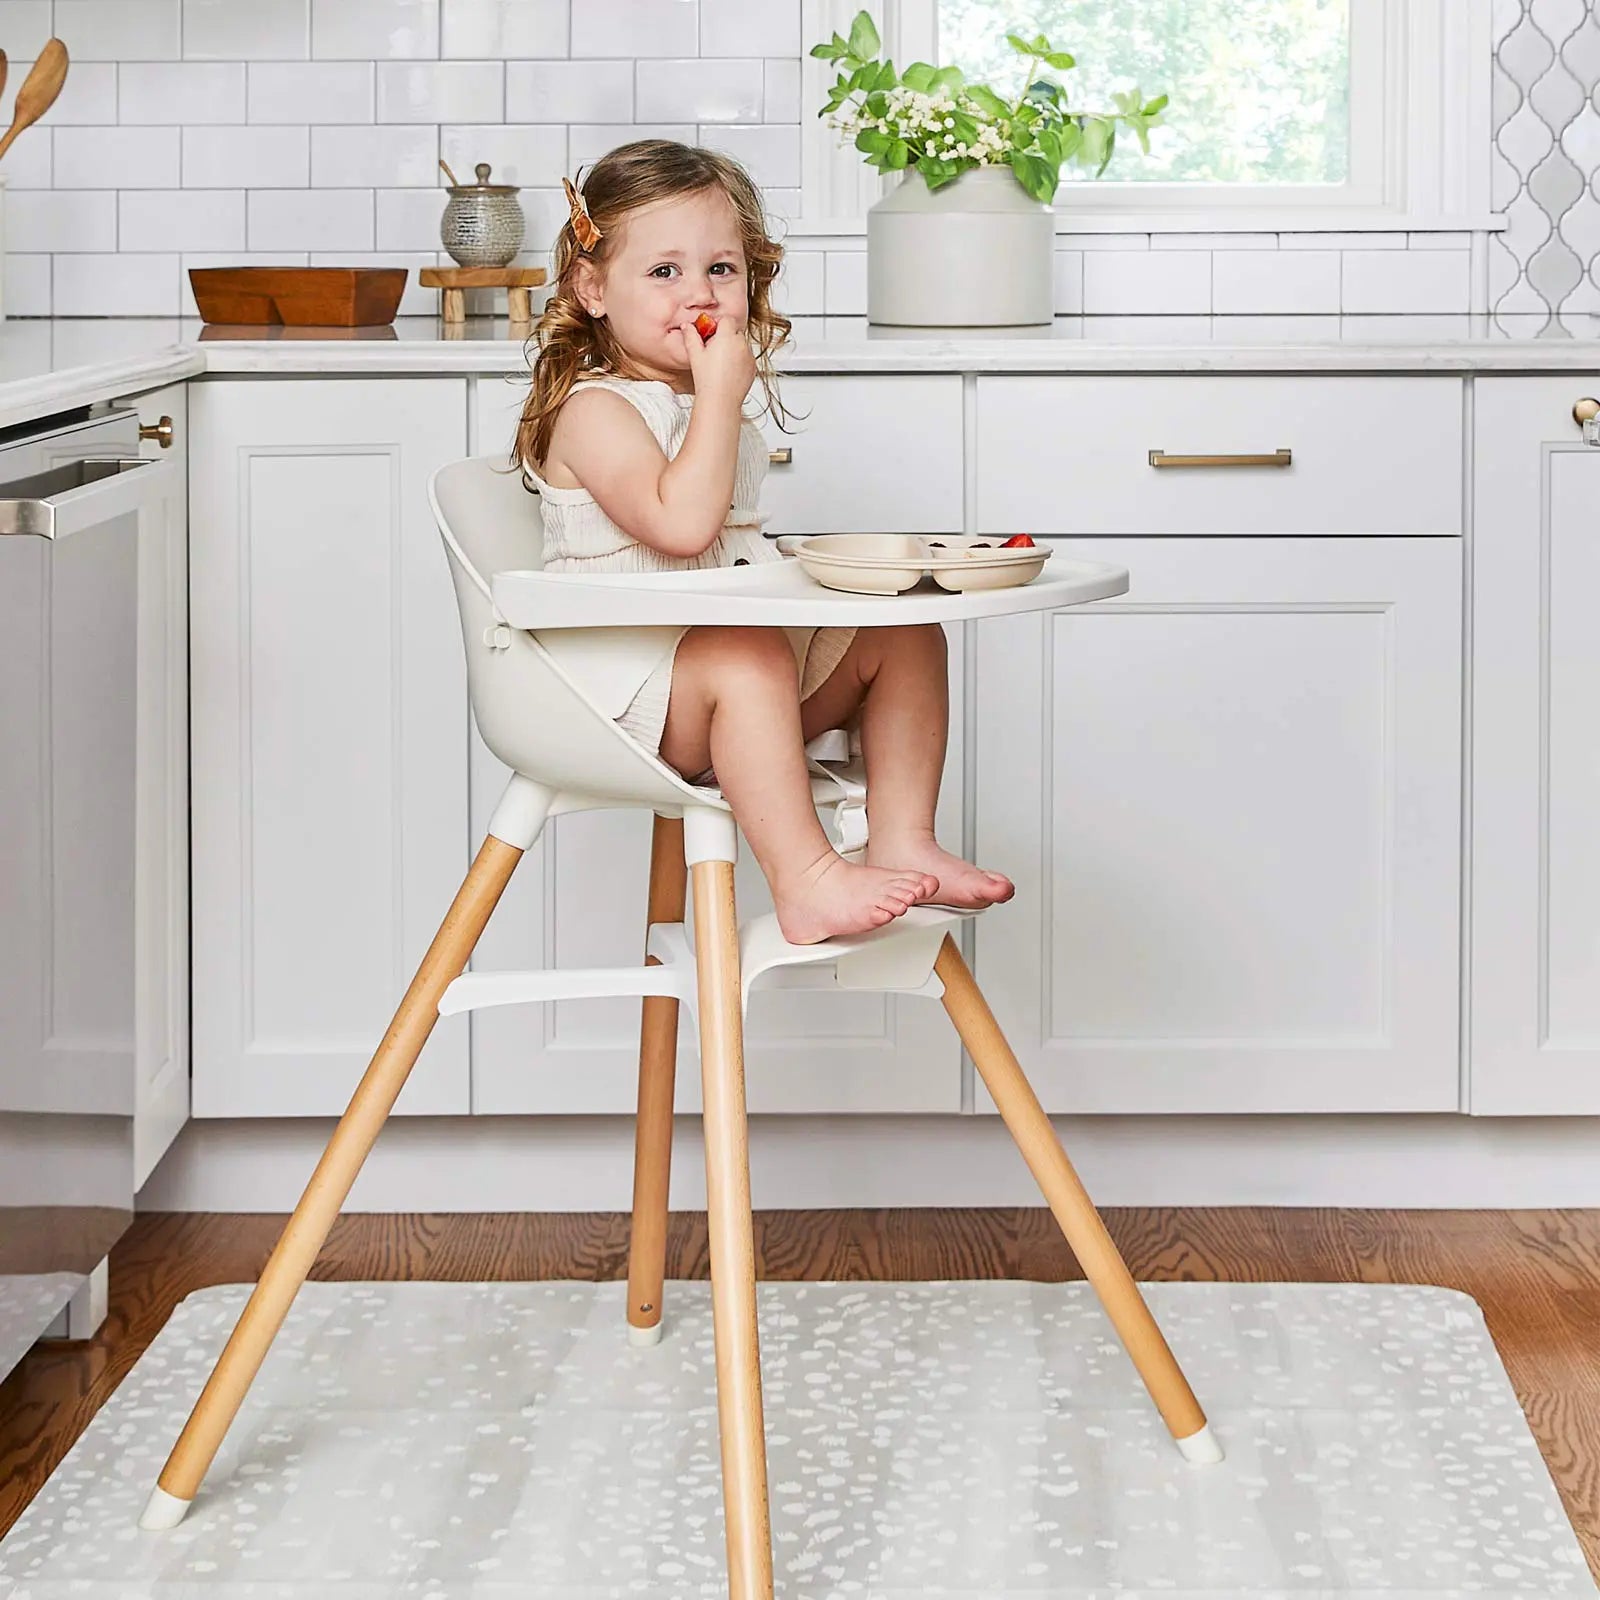 Fawn silver gray and white animal print high chair mat shown in a kitchen underneath a highchair with toddler girl sitting in the chair eating fruit